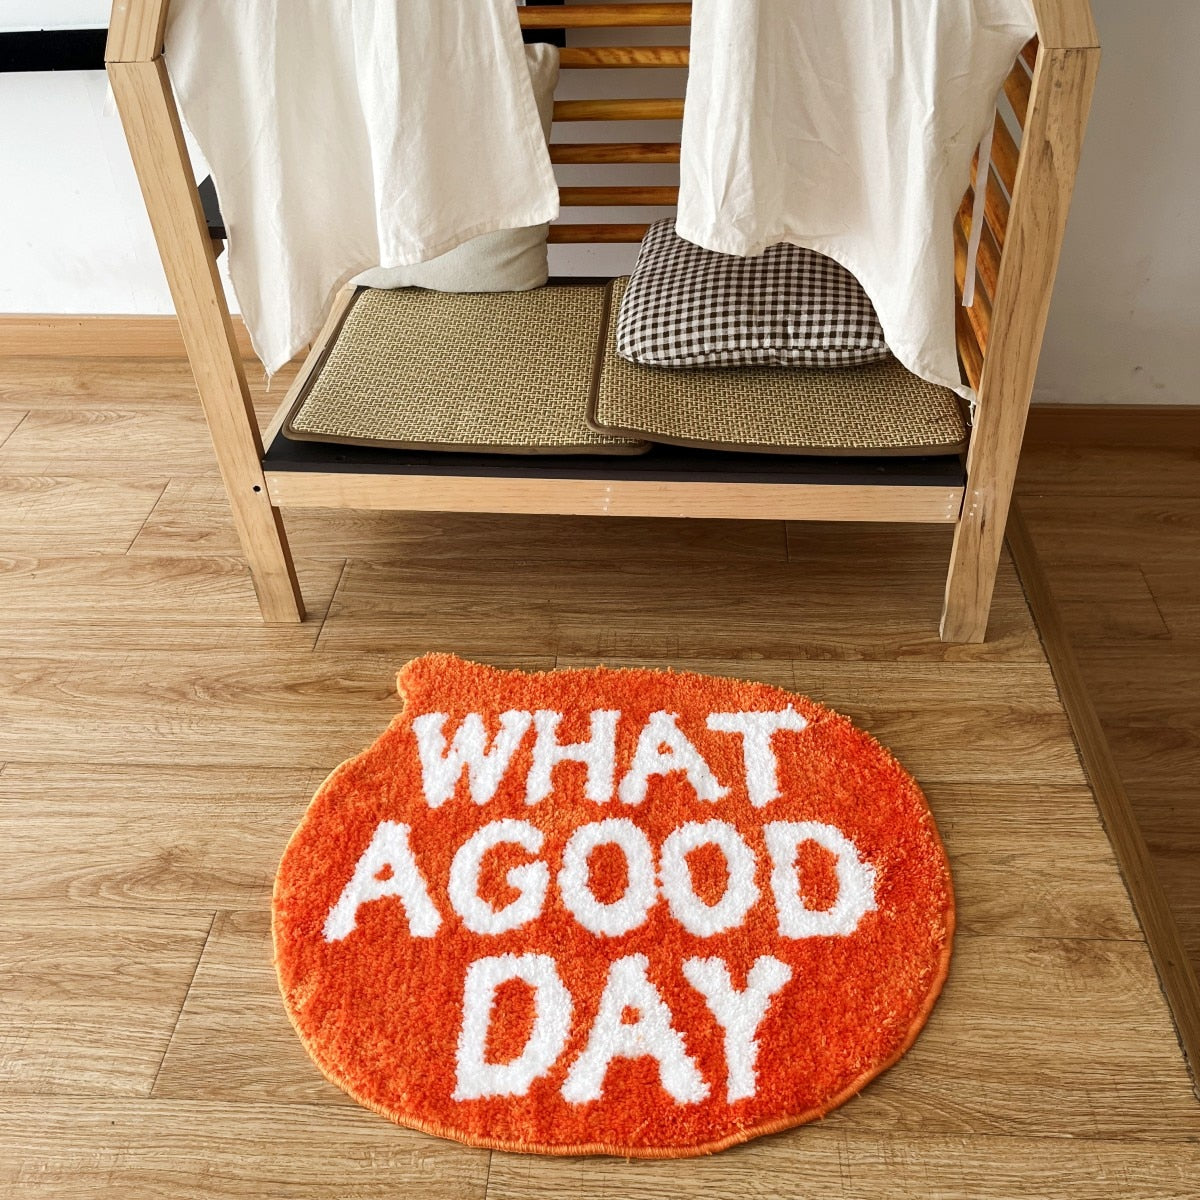 CORX Designs - What A Good Day Rug - Review